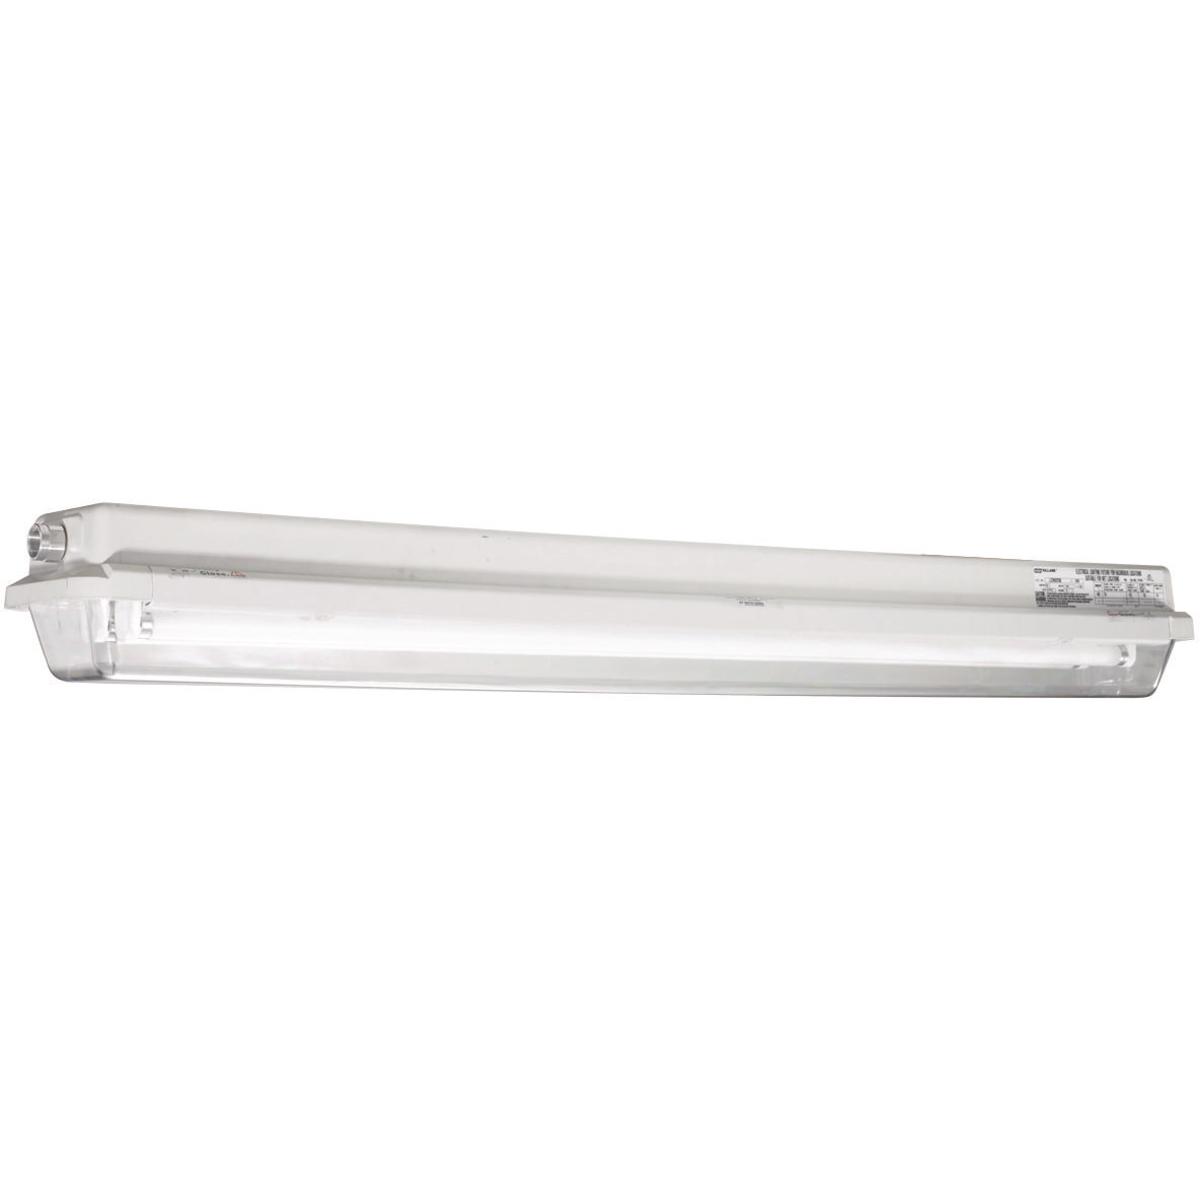 Hubbell LZ2N323DC120 LZ2N Series- 32W 120VDC - 4' 3-Lamp T8 - Electronic 50/60 Hz 0°F Start Medium Bi-Pin  ; Lexan® Clear Lens, impact resistant polycarbonate ; Housing-one piece fiberglass reinforced polyester, NEMA 4X & IP66 rated. ; Two 3/4” NTP aluminum hubs - one at each